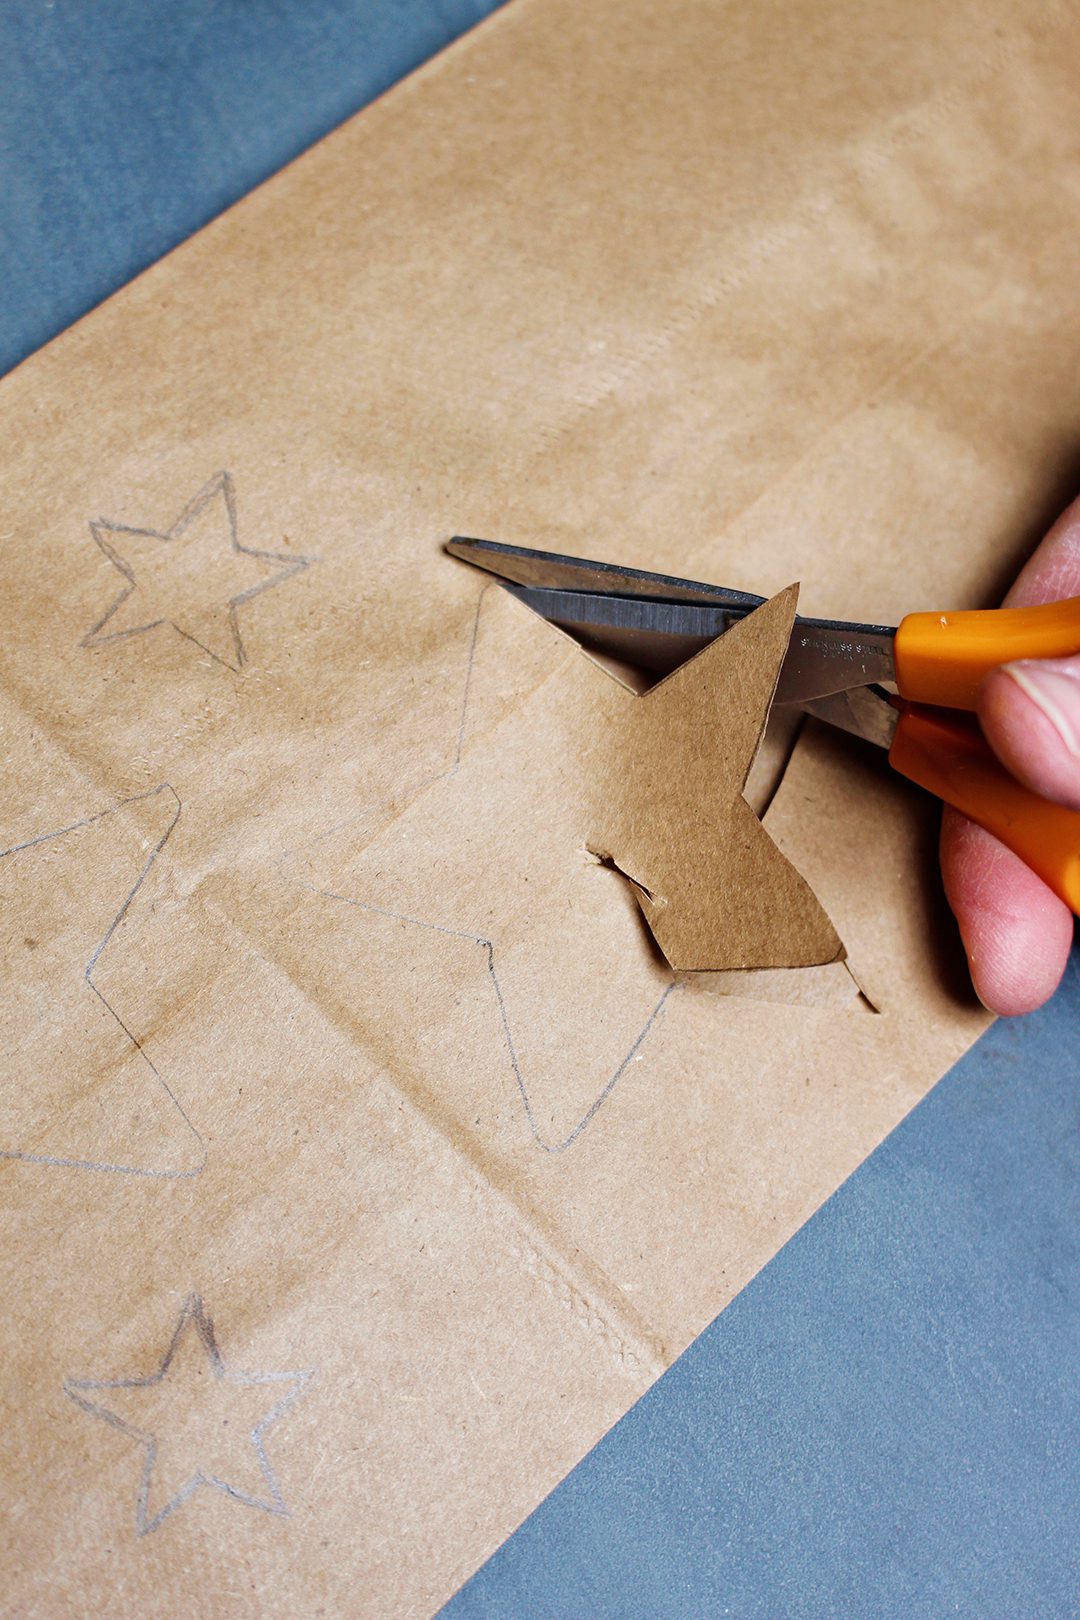 A pair of scissors cutting out star shapes from a brown paper bag.